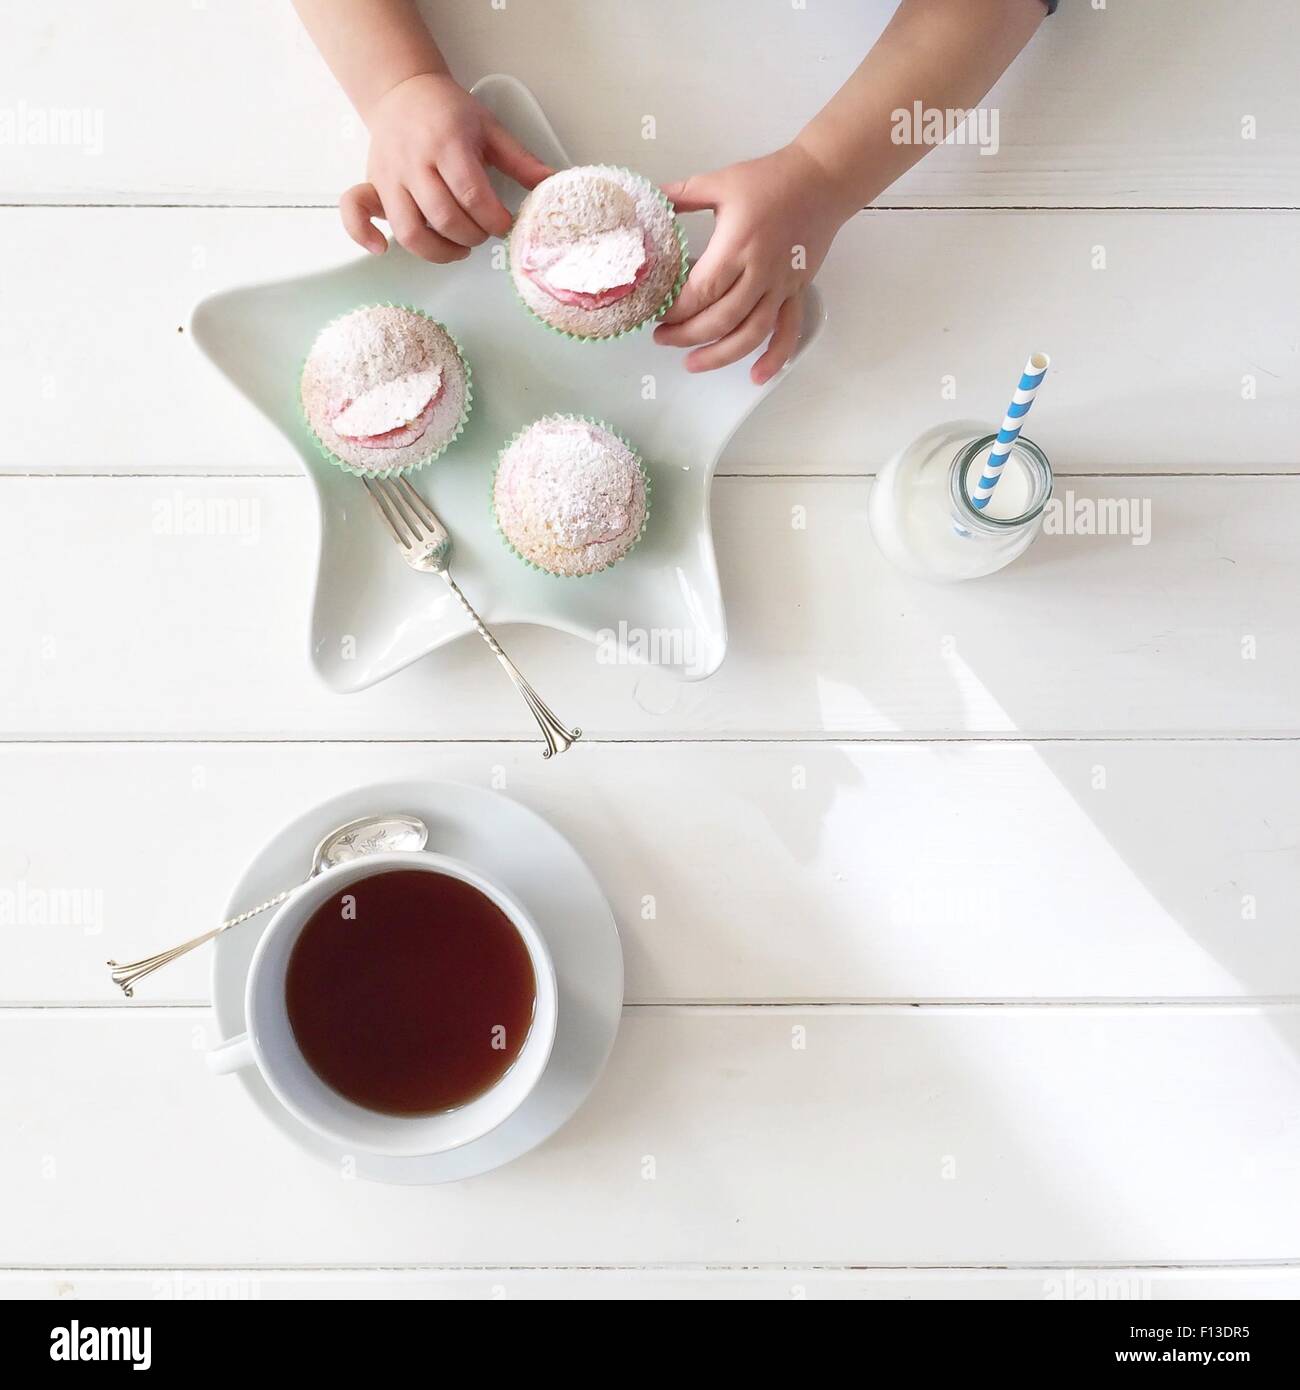 Boy's hands taking a cupcake, with tea and bottle of milk Stock Photo